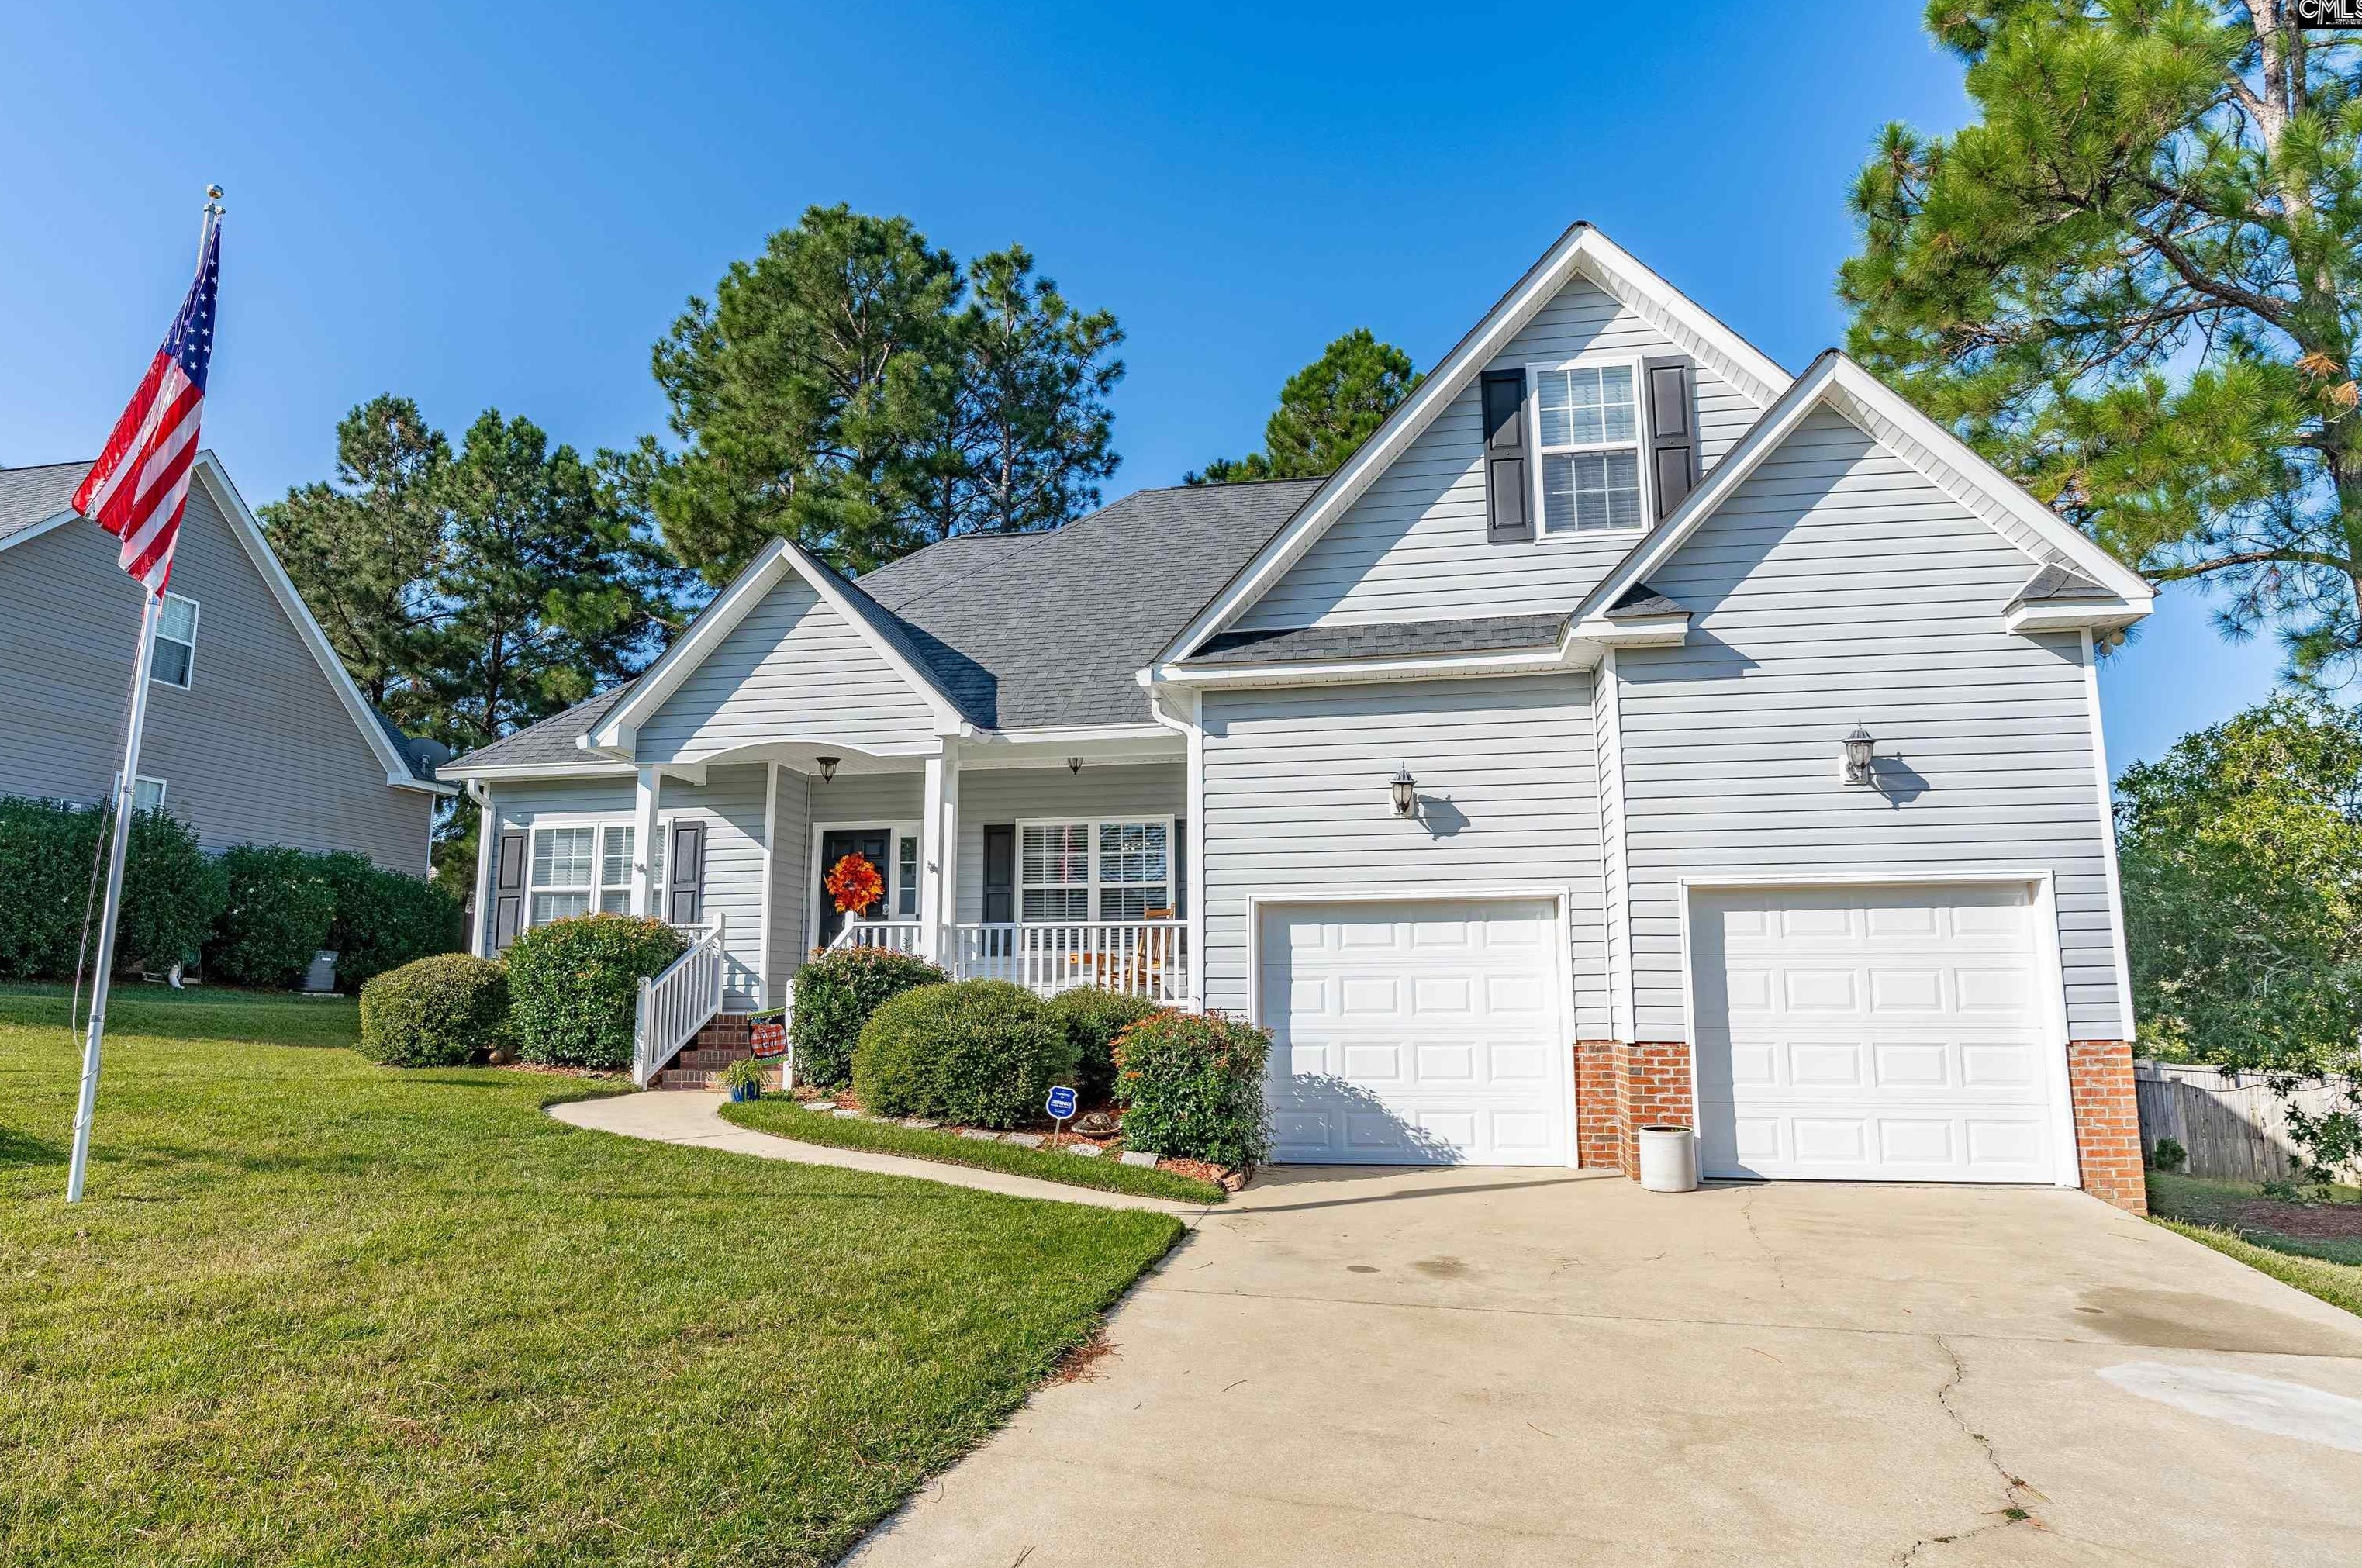 317 Anden Hall Dr, Columbia, SC 29229-9573